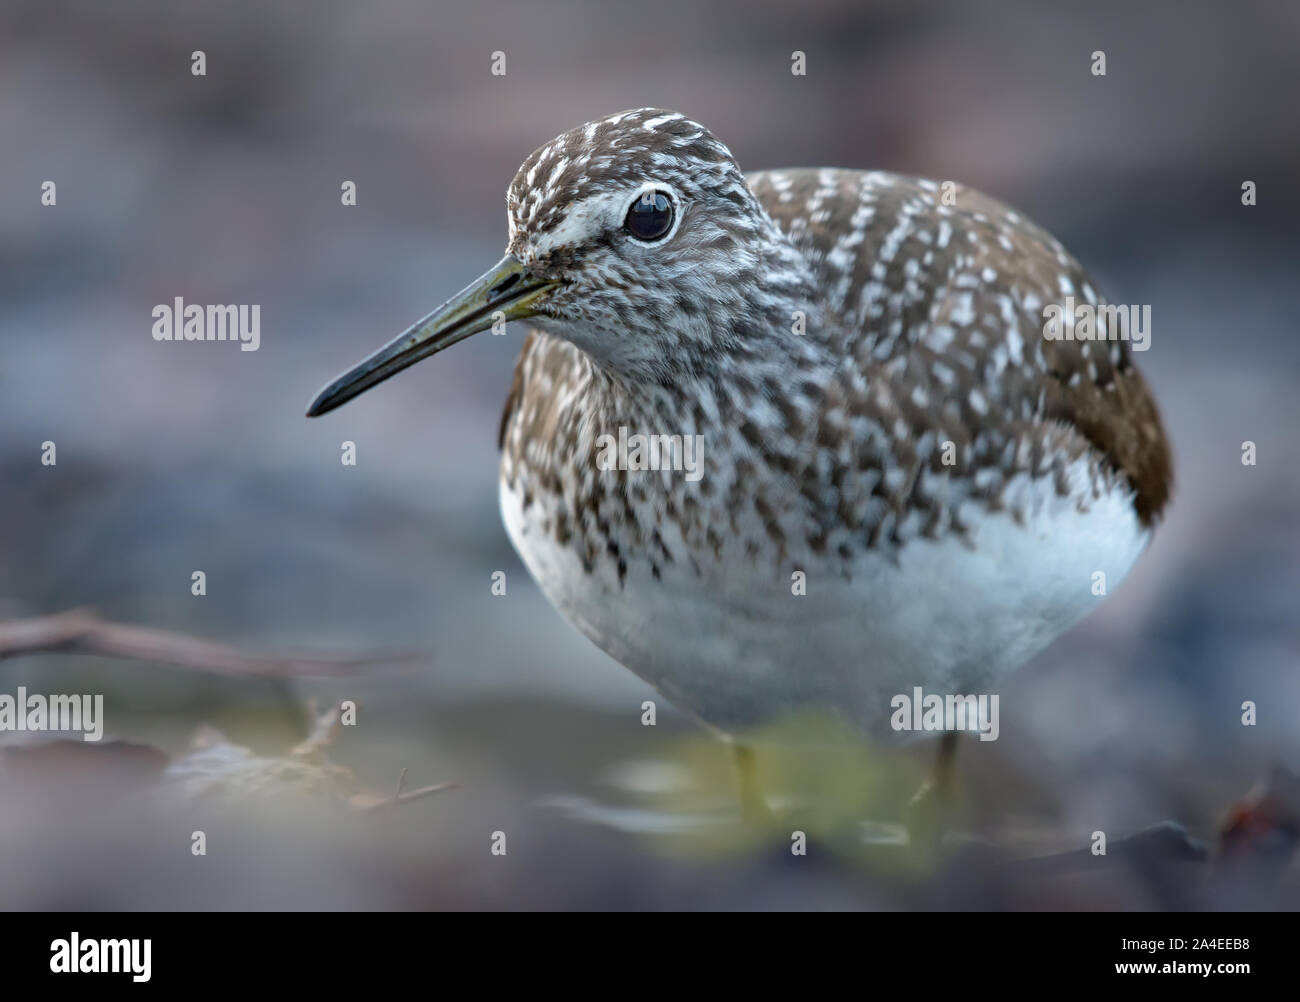 Mature Green Sandpiper curiously looks into the camera from very close portrait distance Stock Photo